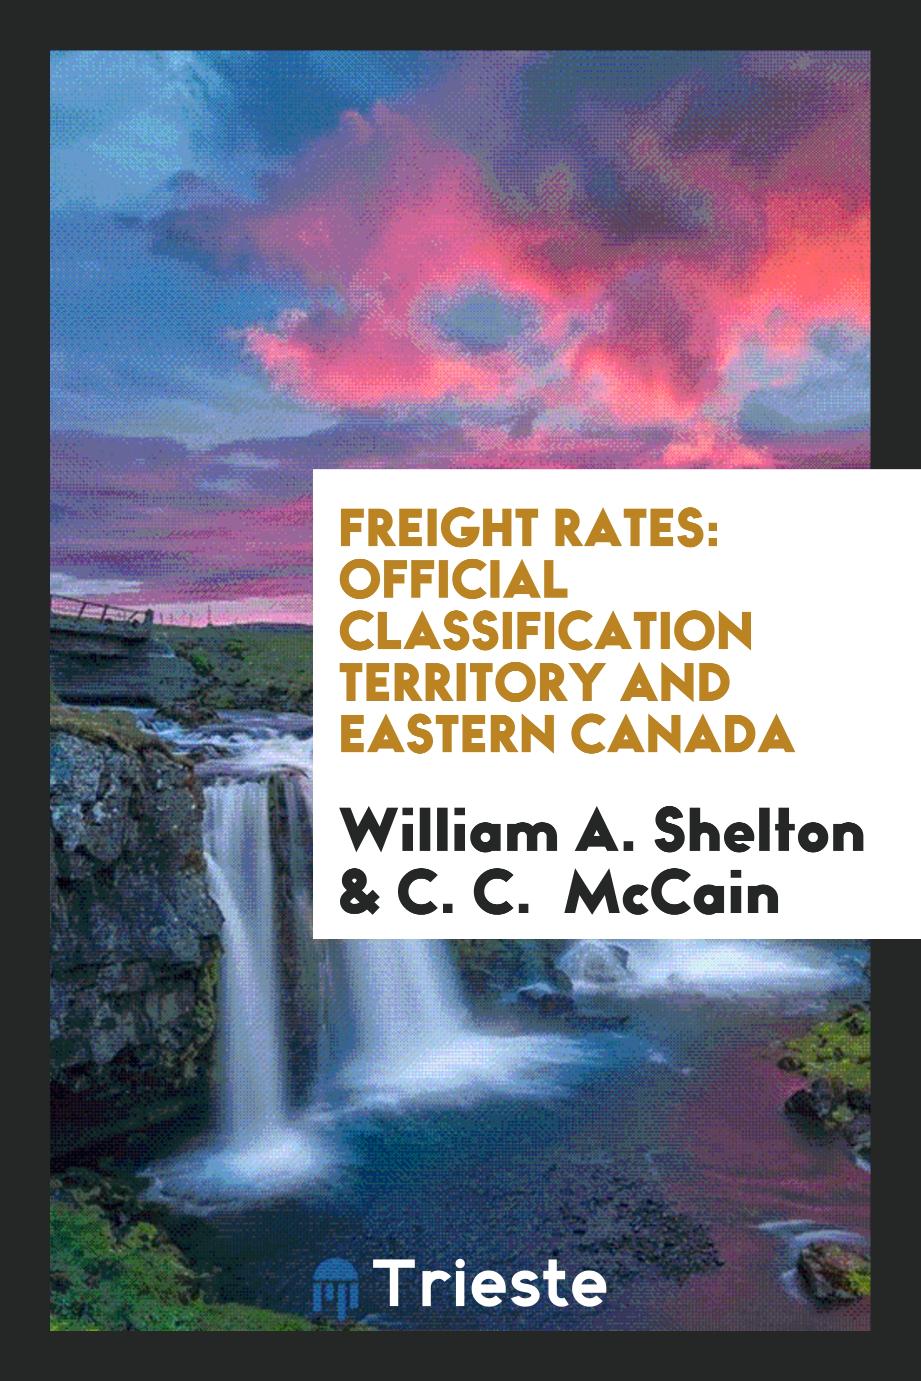 Freight Rates: Official Classification Territory and Eastern Canada